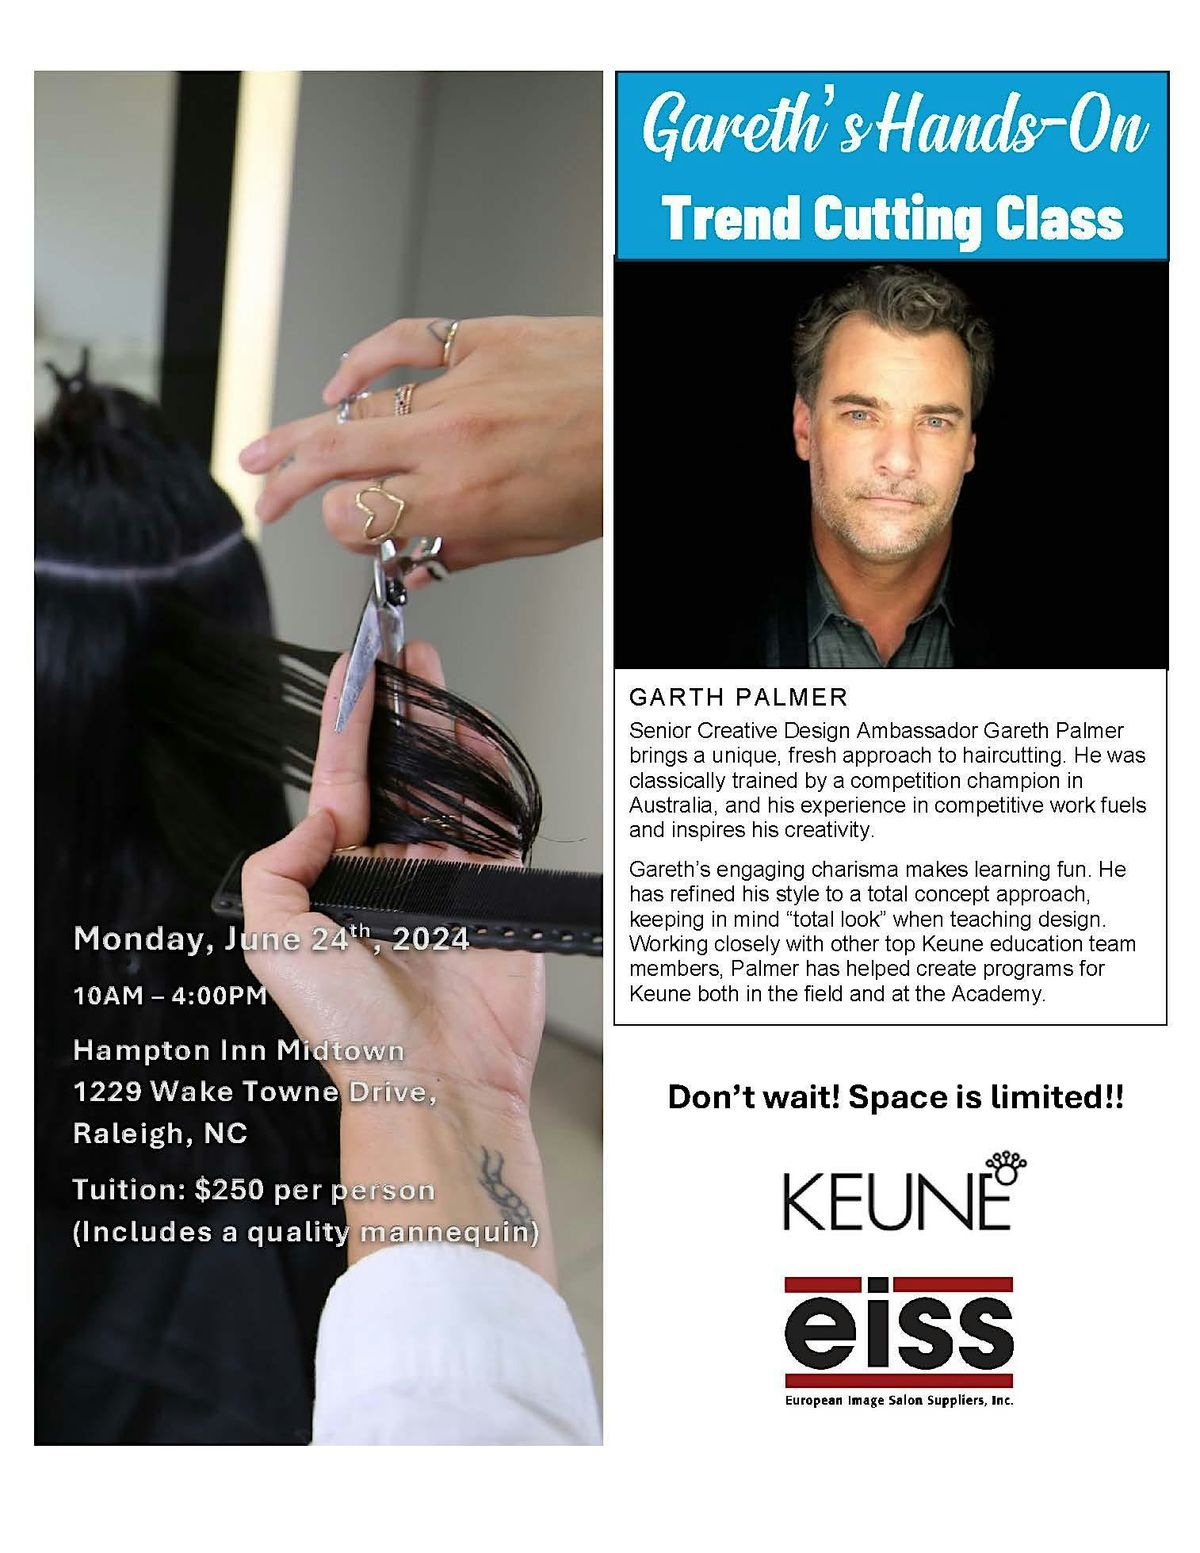 Hands-On Trend Cutting Class with Gareth Palmer